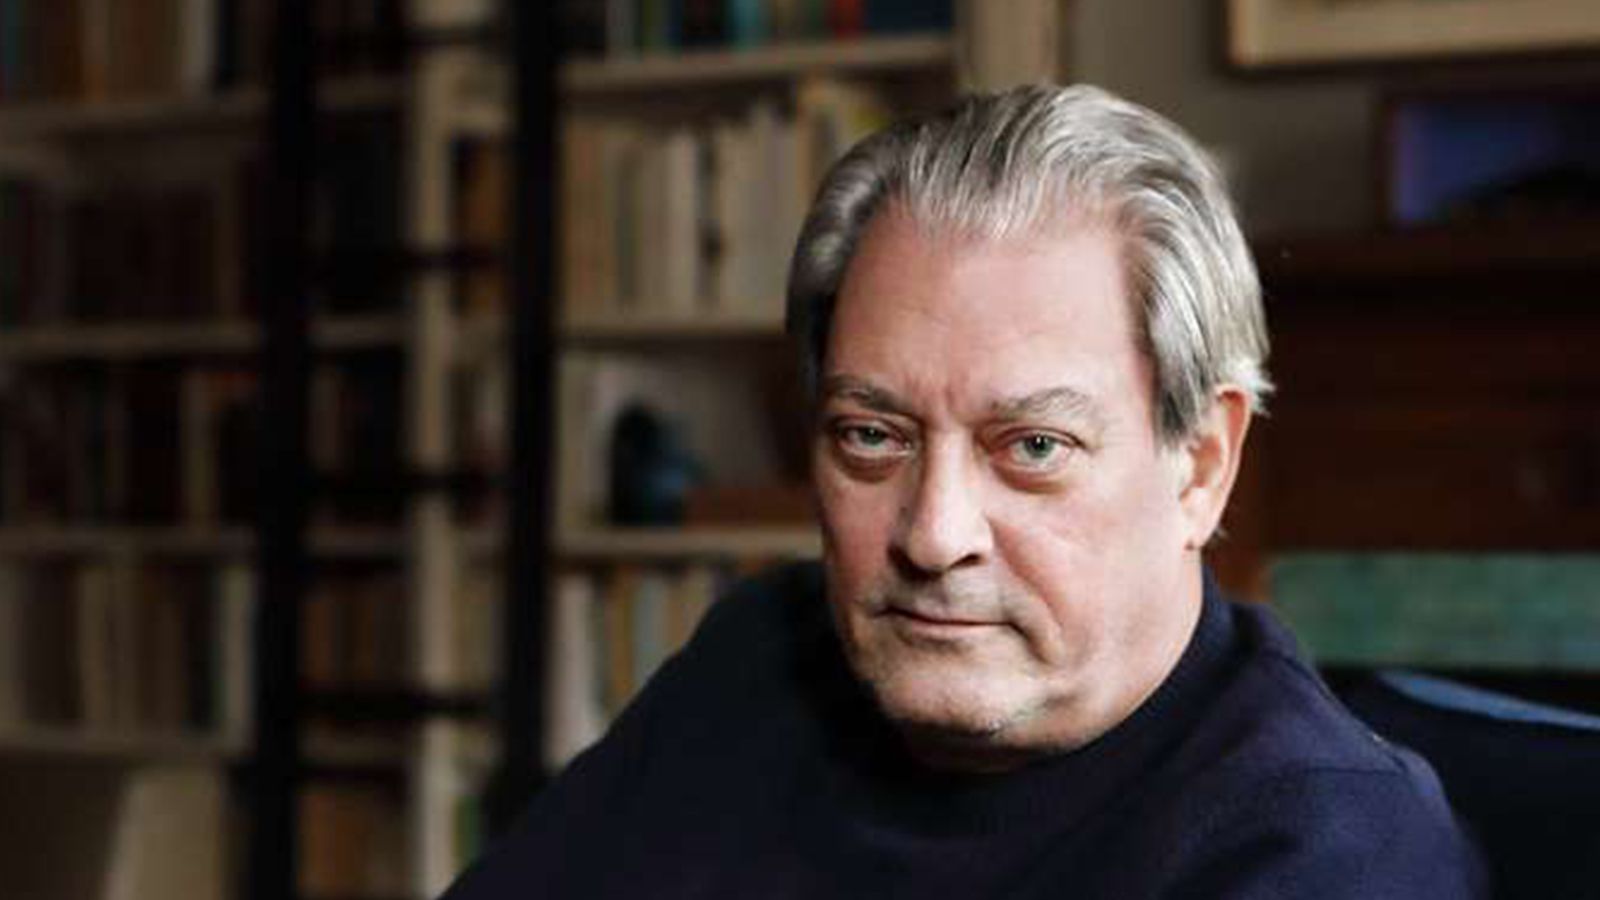 Best-Selling Author Series: Paul Auster